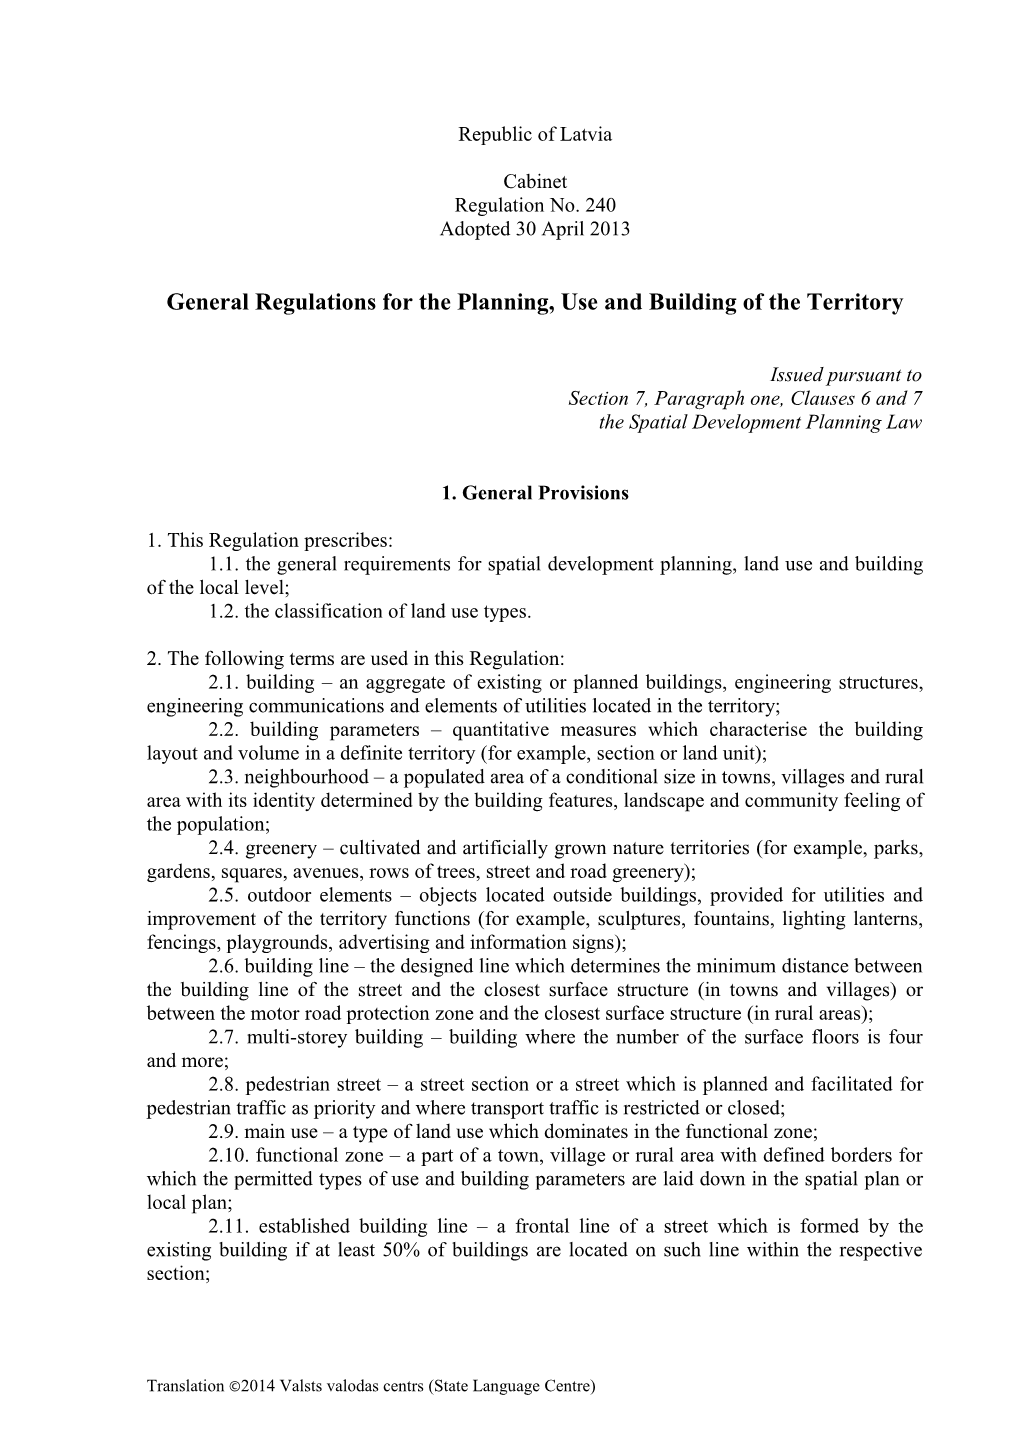 General Regulations for the Planning, Use and Building of the Territory